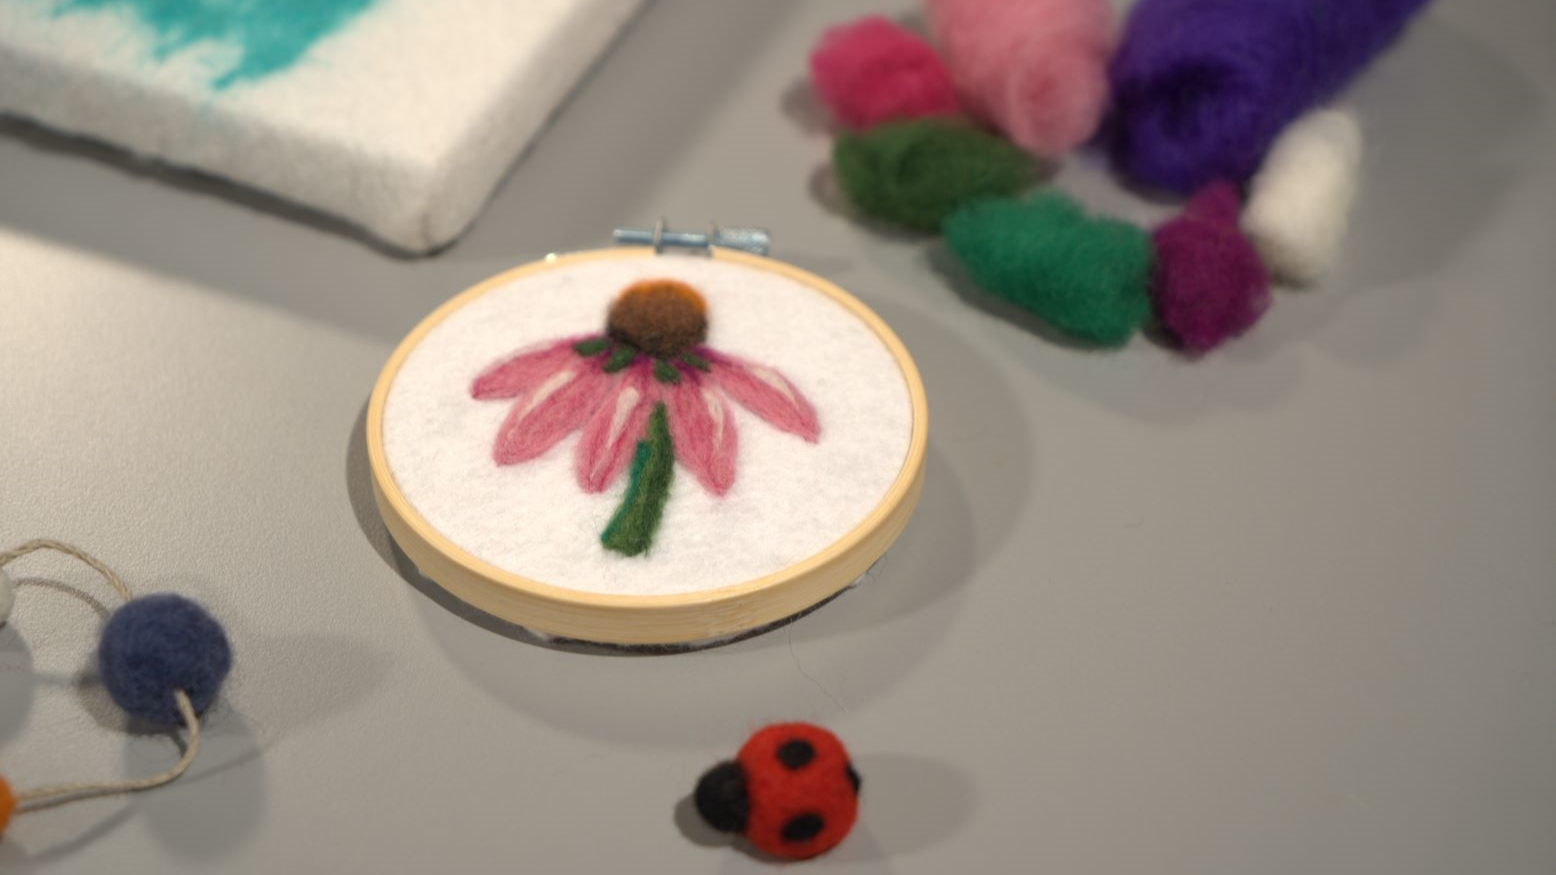 A few needle felting crafts and supplies on a gray surface. In the center is a circular craft made in an embroidery hoop depicting a flower with pink petals using felt. Below that is a small ladybug craft made from felt. There are piles of felt fibers in the top right corner of the image, and in the top left corner is part of a canvas. 